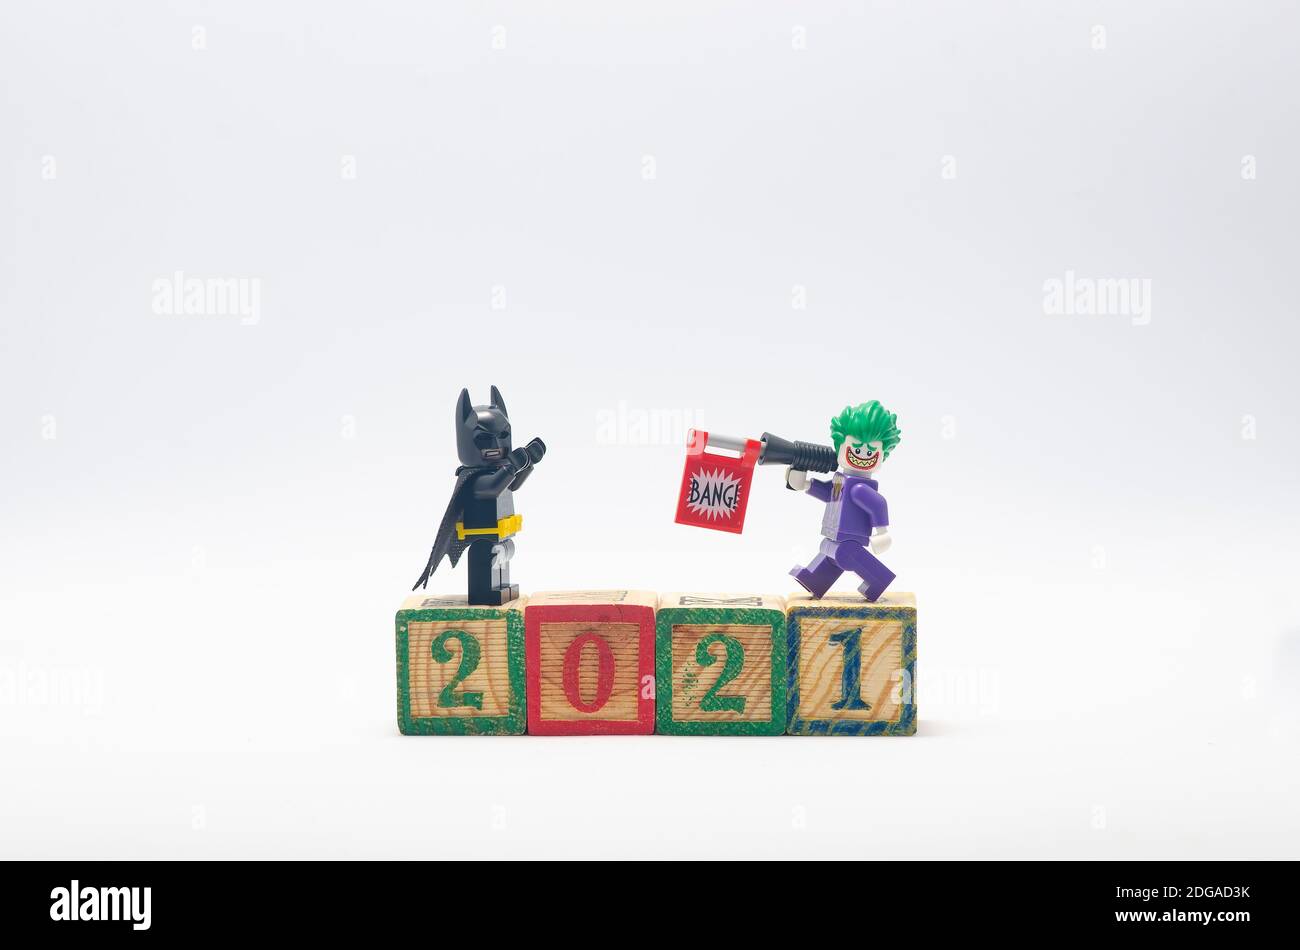 lego batman and joker celebrating year 2021. minifigures are manufactured by The Lego Group. Stock Photo